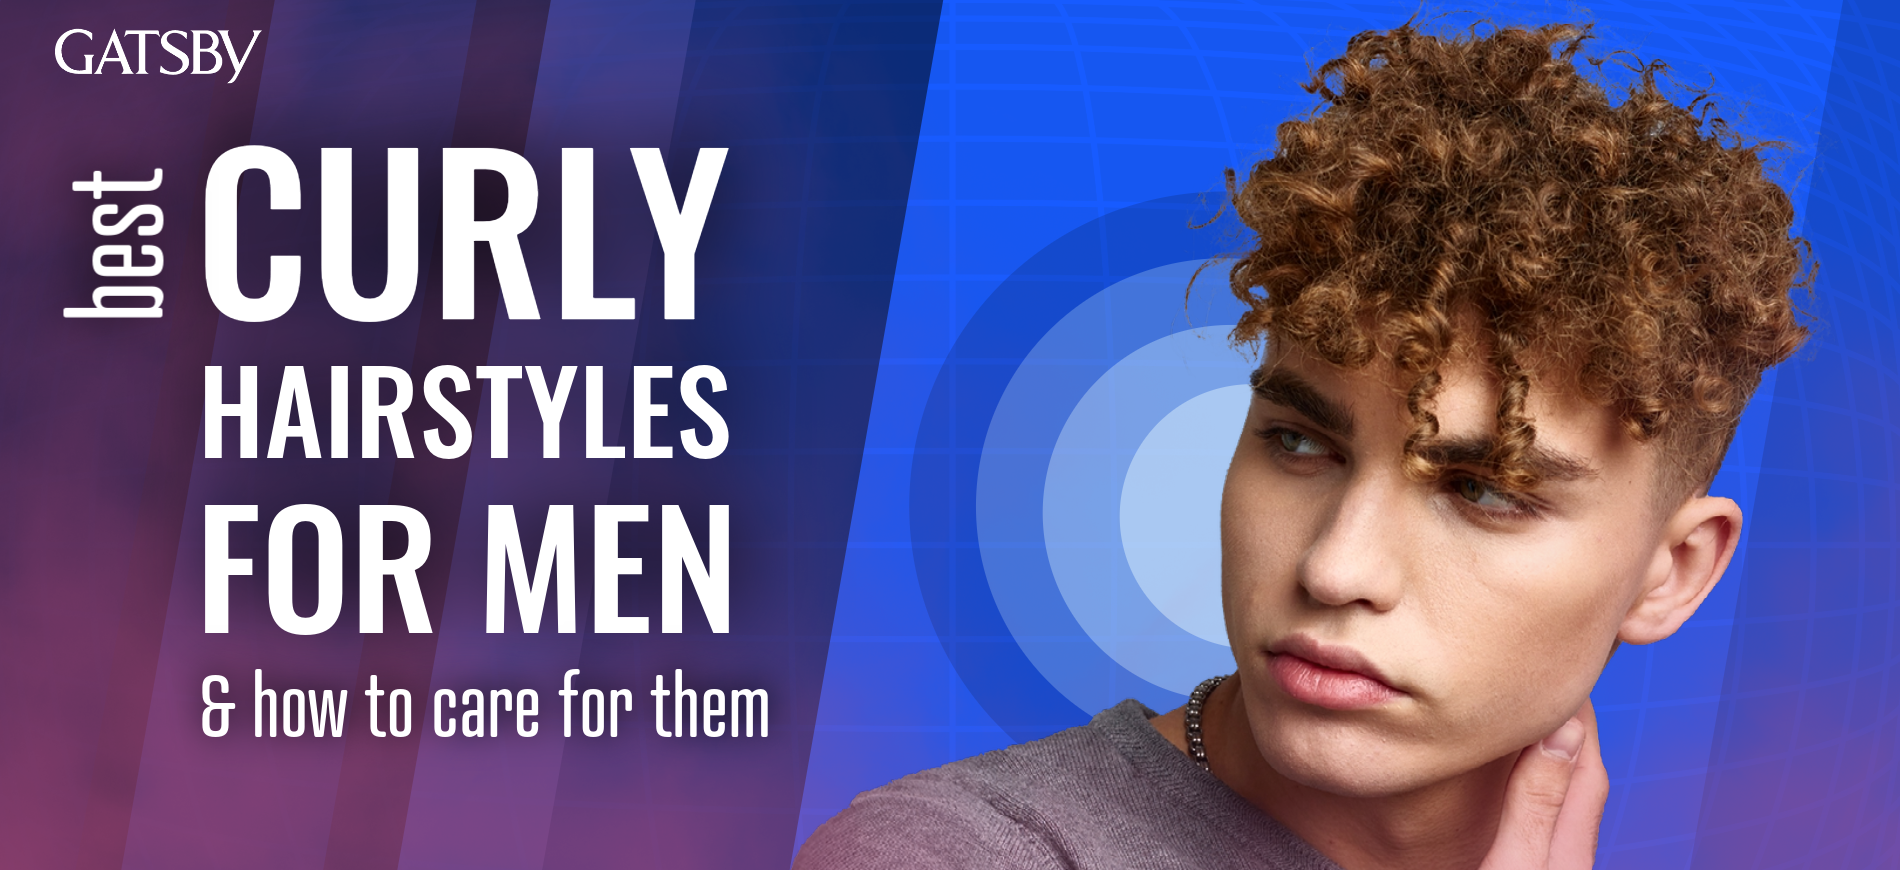 Stylish Long Curly Hair for Men